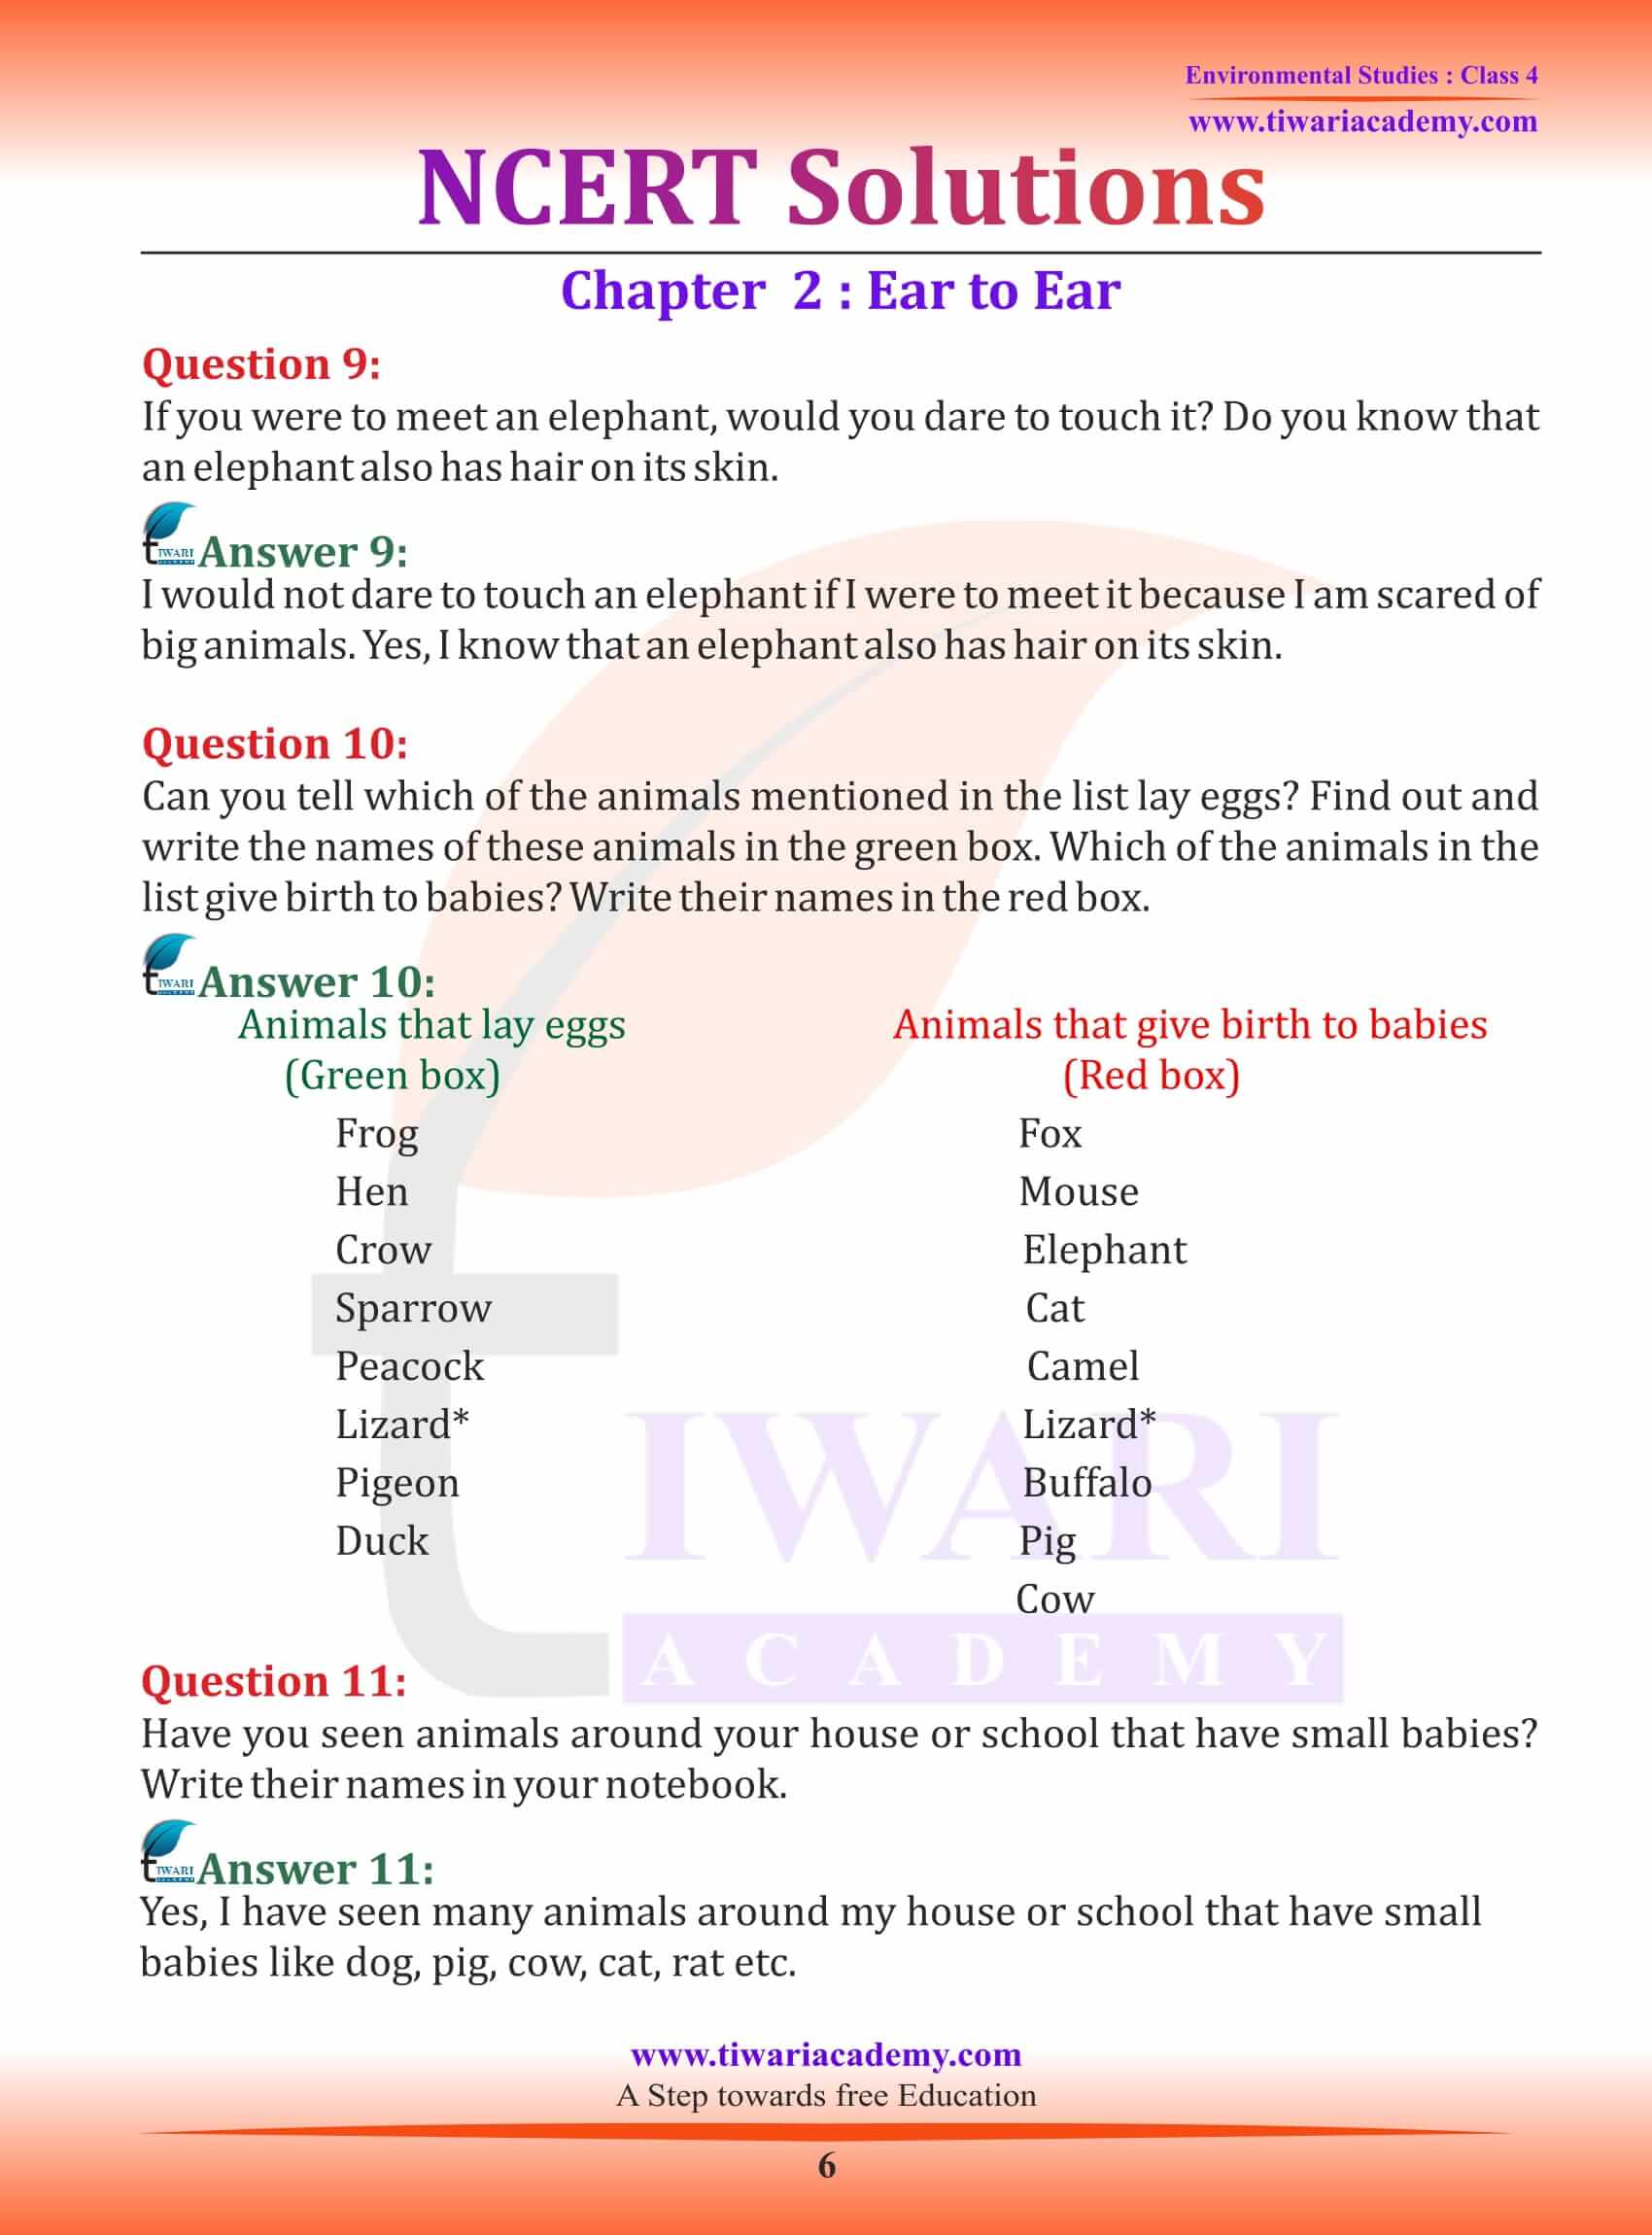 NCERT Solutions for Class 4 EVS Chapter 2 question answers